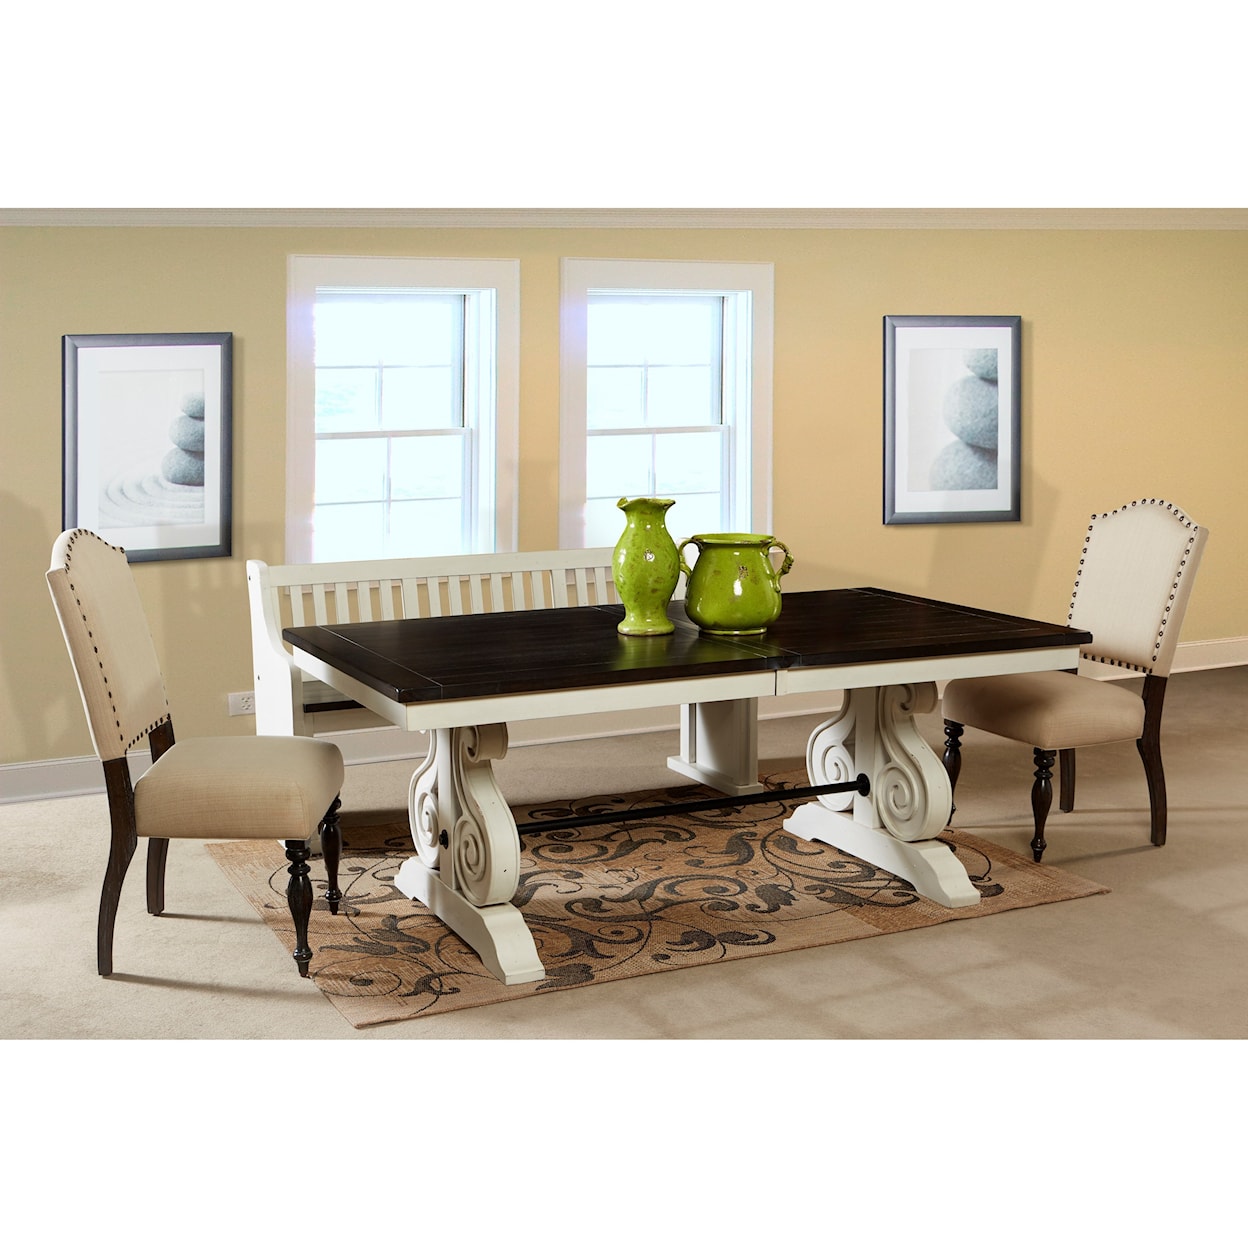 Sunny Designs Carriage House Trestle Table